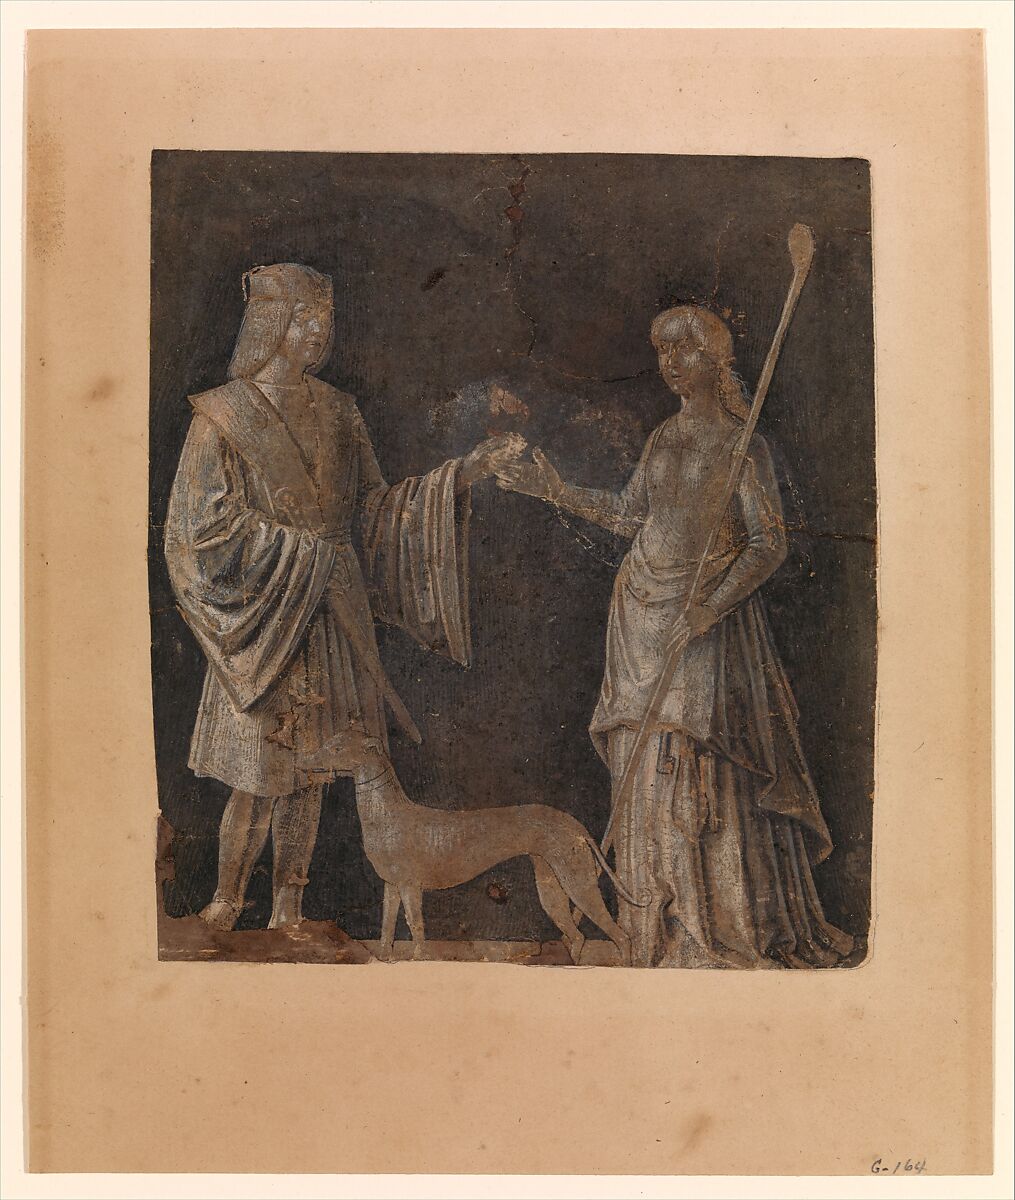 A Gentleman, a Young Woman, and a Dog, Michele da Verona (Italian, Verona ca. 1470–Verona 1536/1544) (?), Brush and gray and brown ink, heightened with white, on light brown paper. 